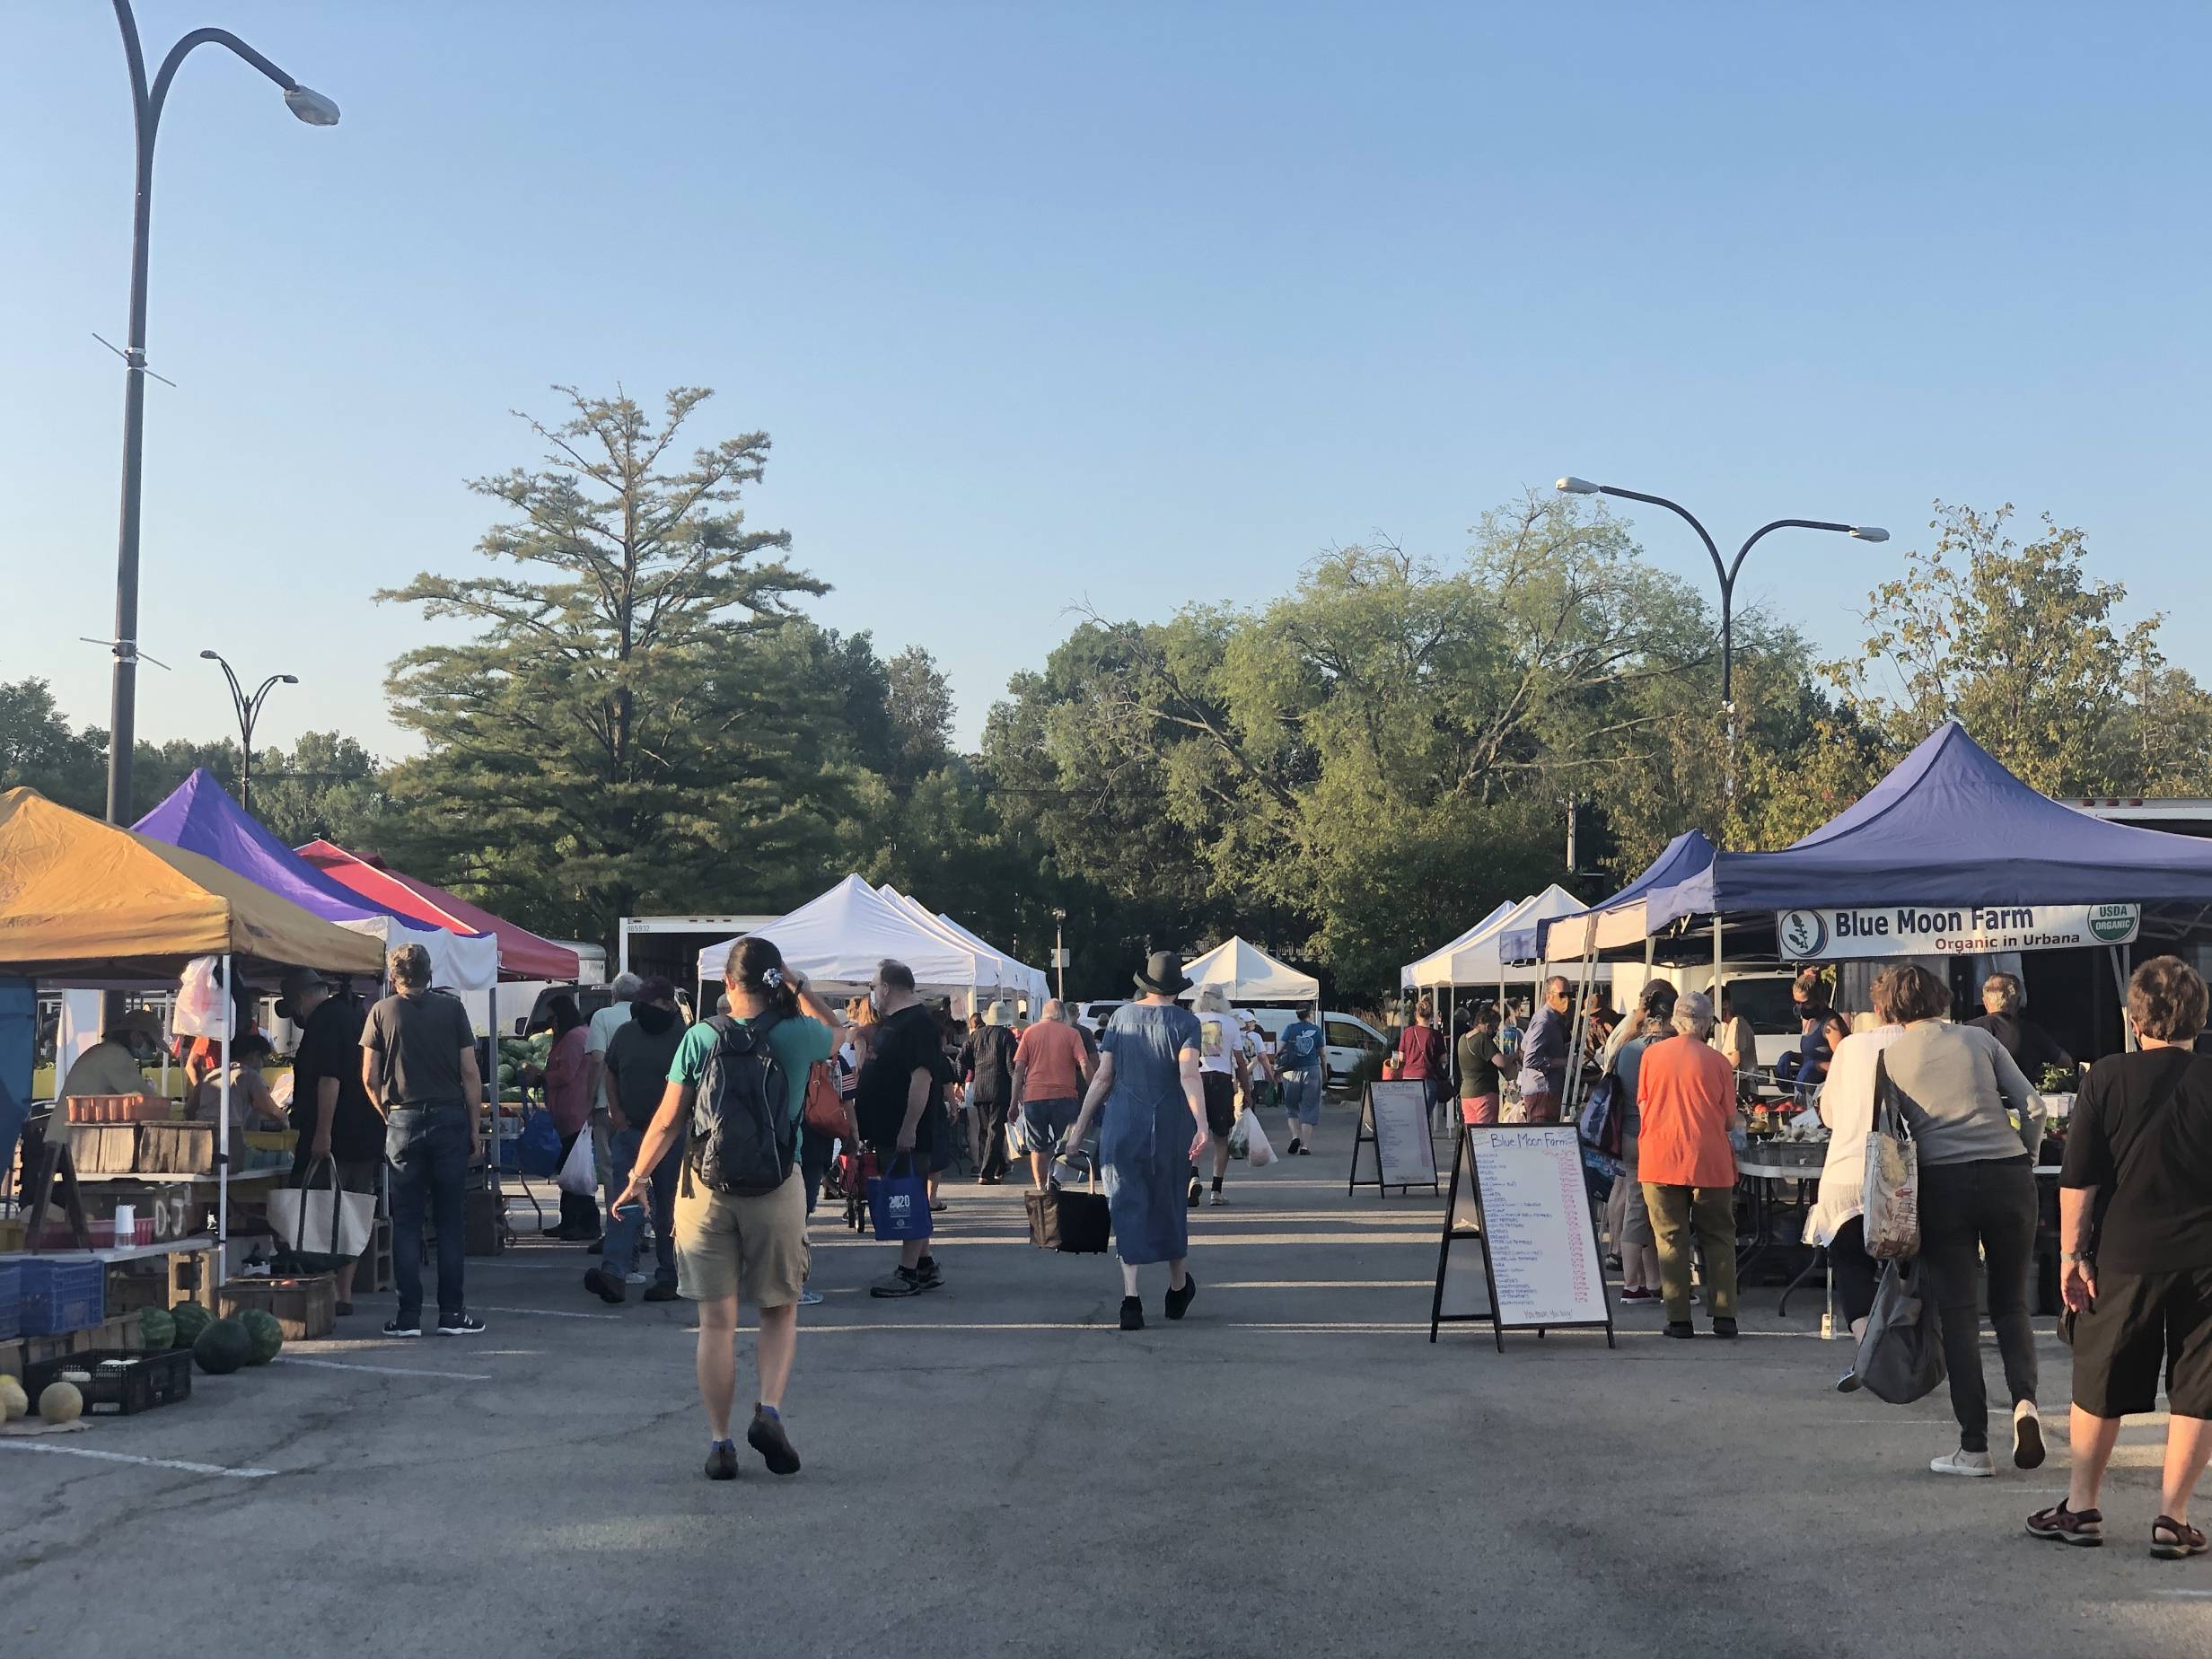 A busy Saturday morning at the Urbana Market in the Square with masked shoppers looking and buying produce from tented vendors at the market. Photo by Alyssa Buckley.